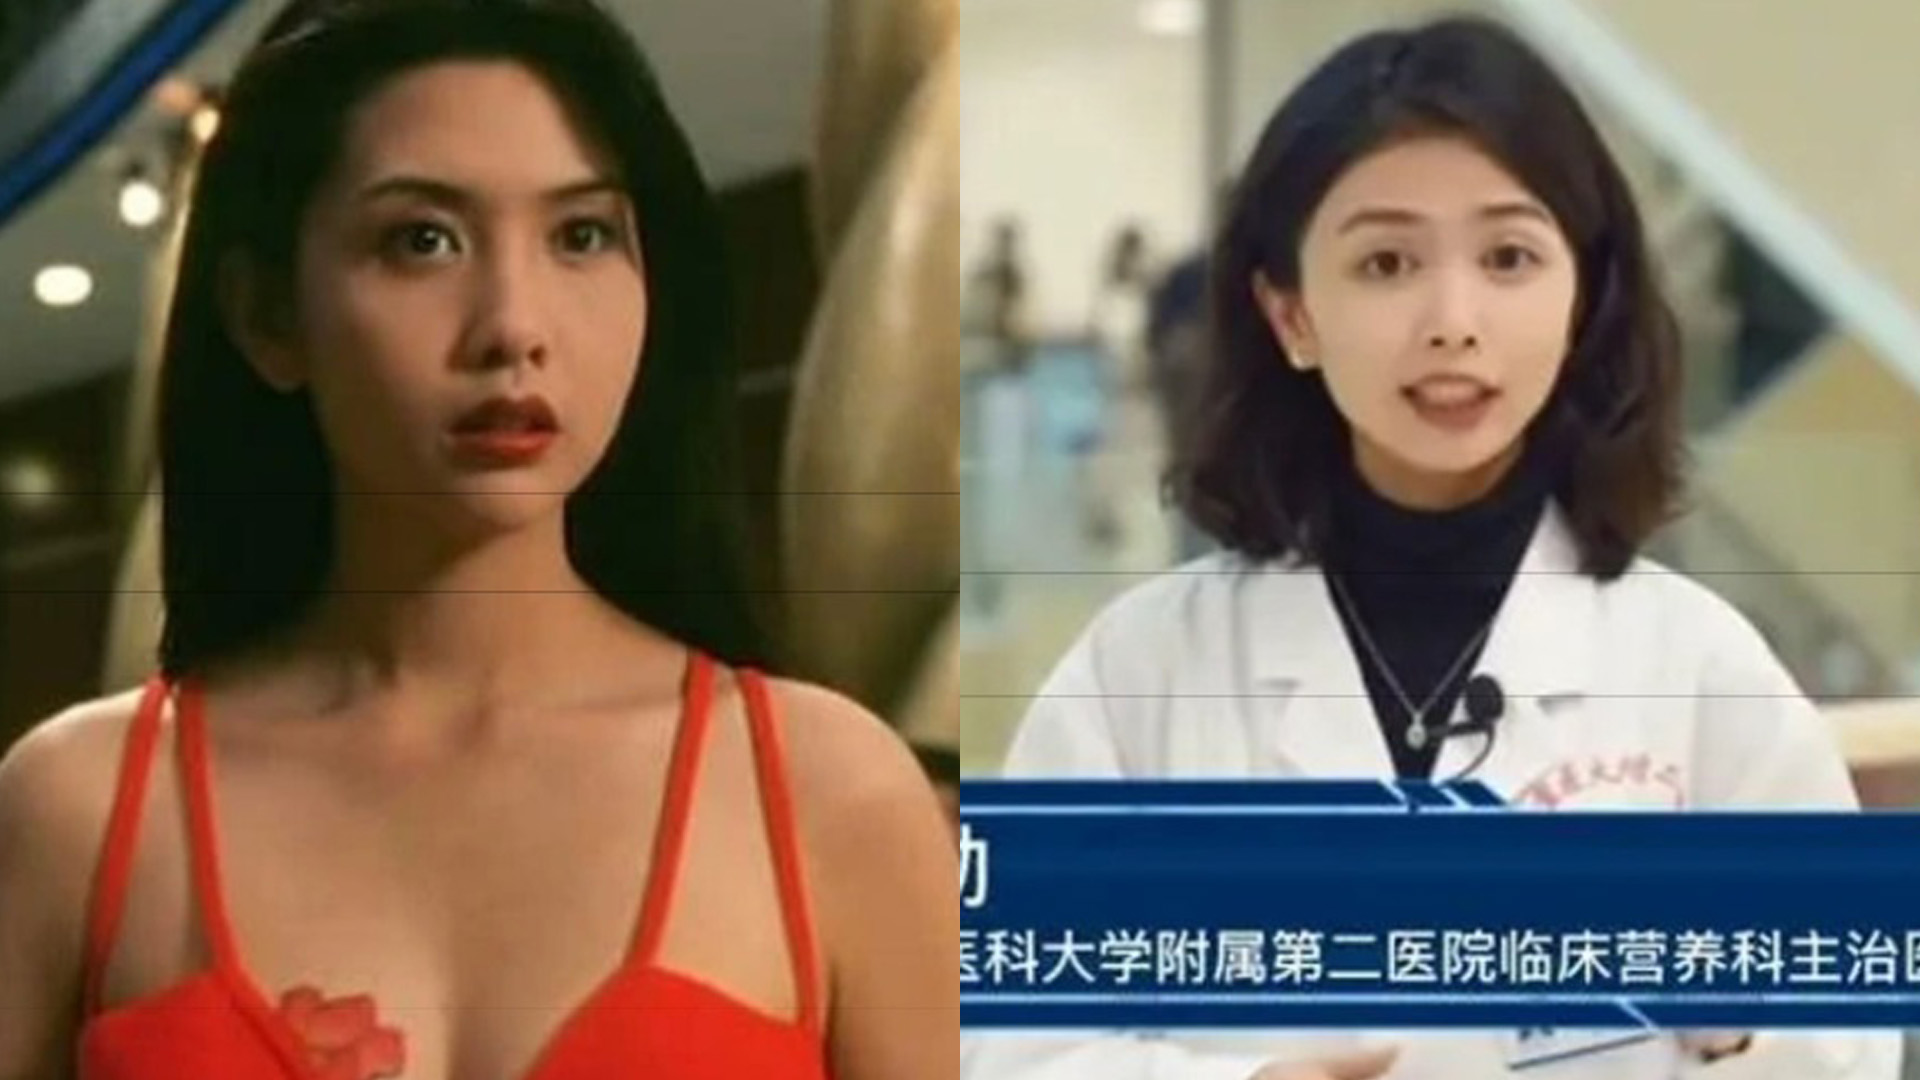 And here's a side by side comparison of Chingmy and Zhou Qin